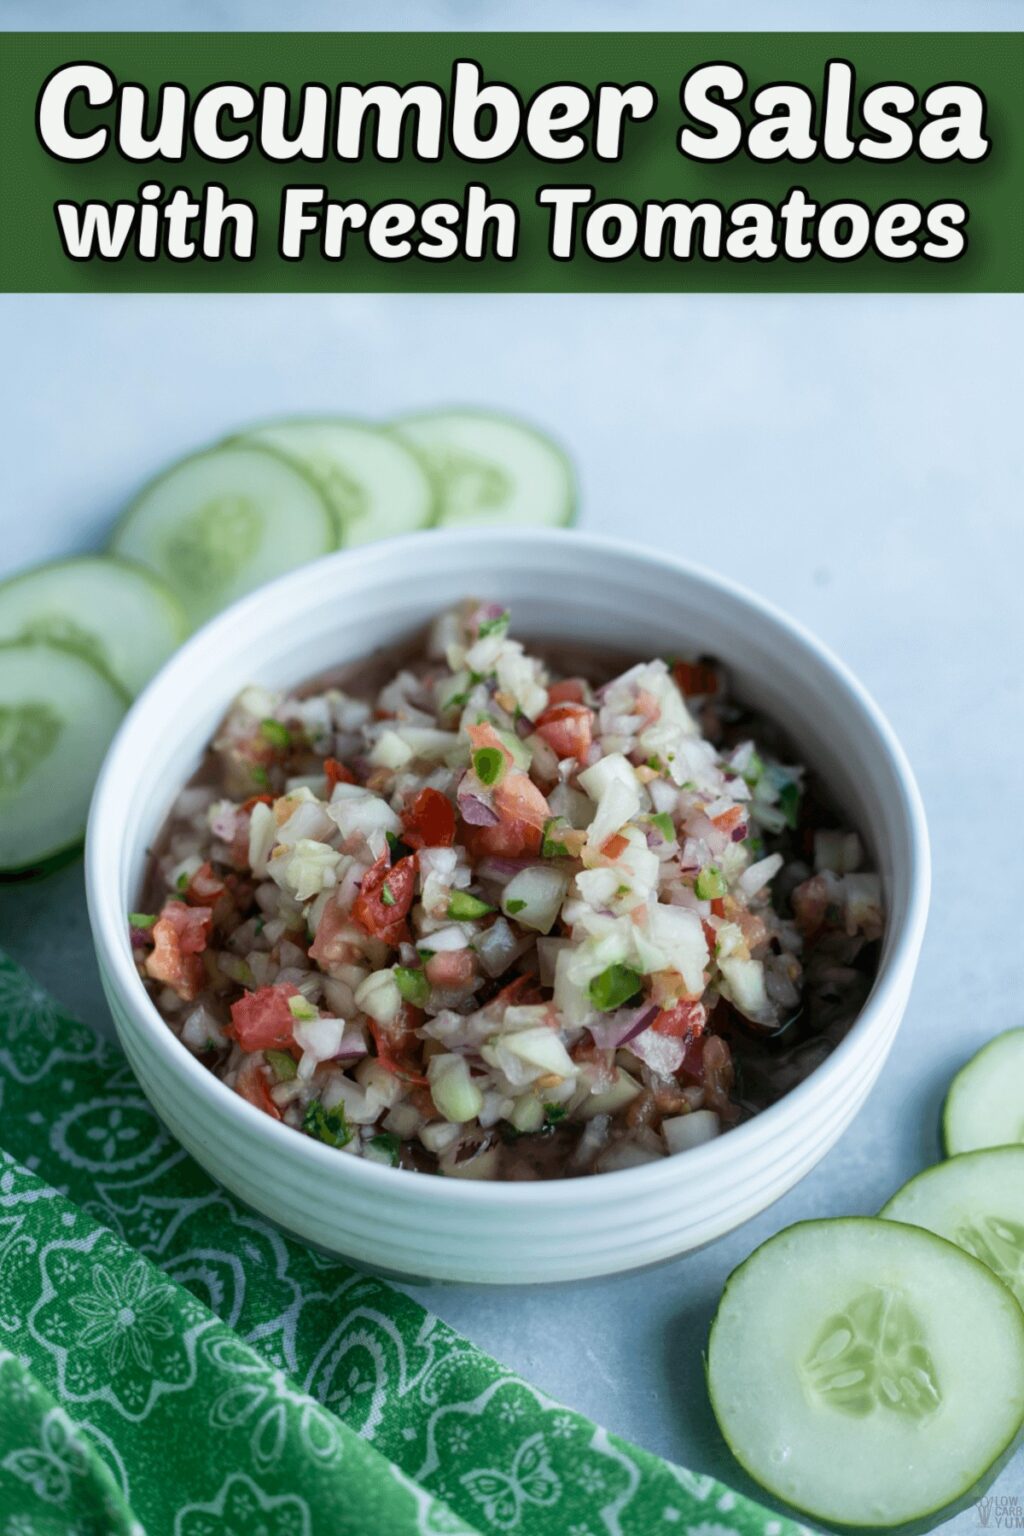 Keto Cucumber Salsa with Tomatoes - Low Carb Yum